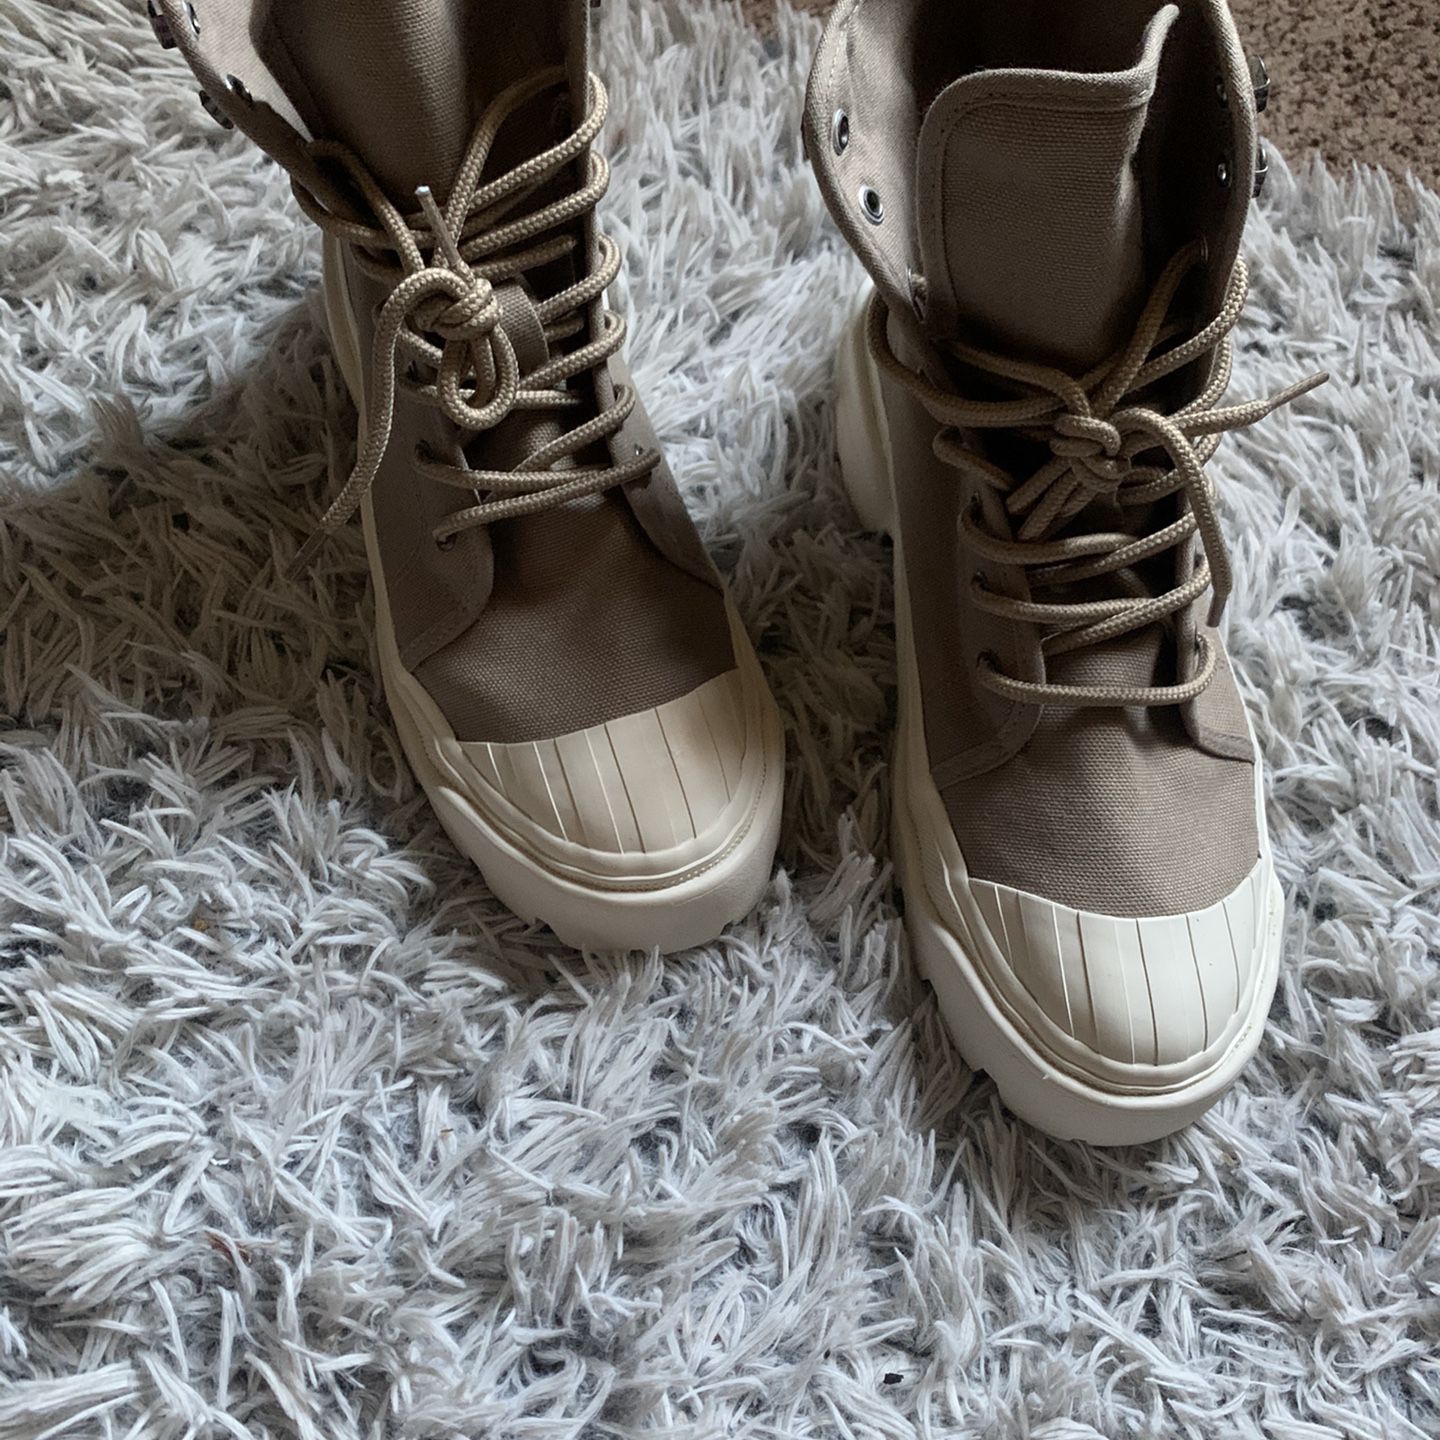 Hightop Military style boots